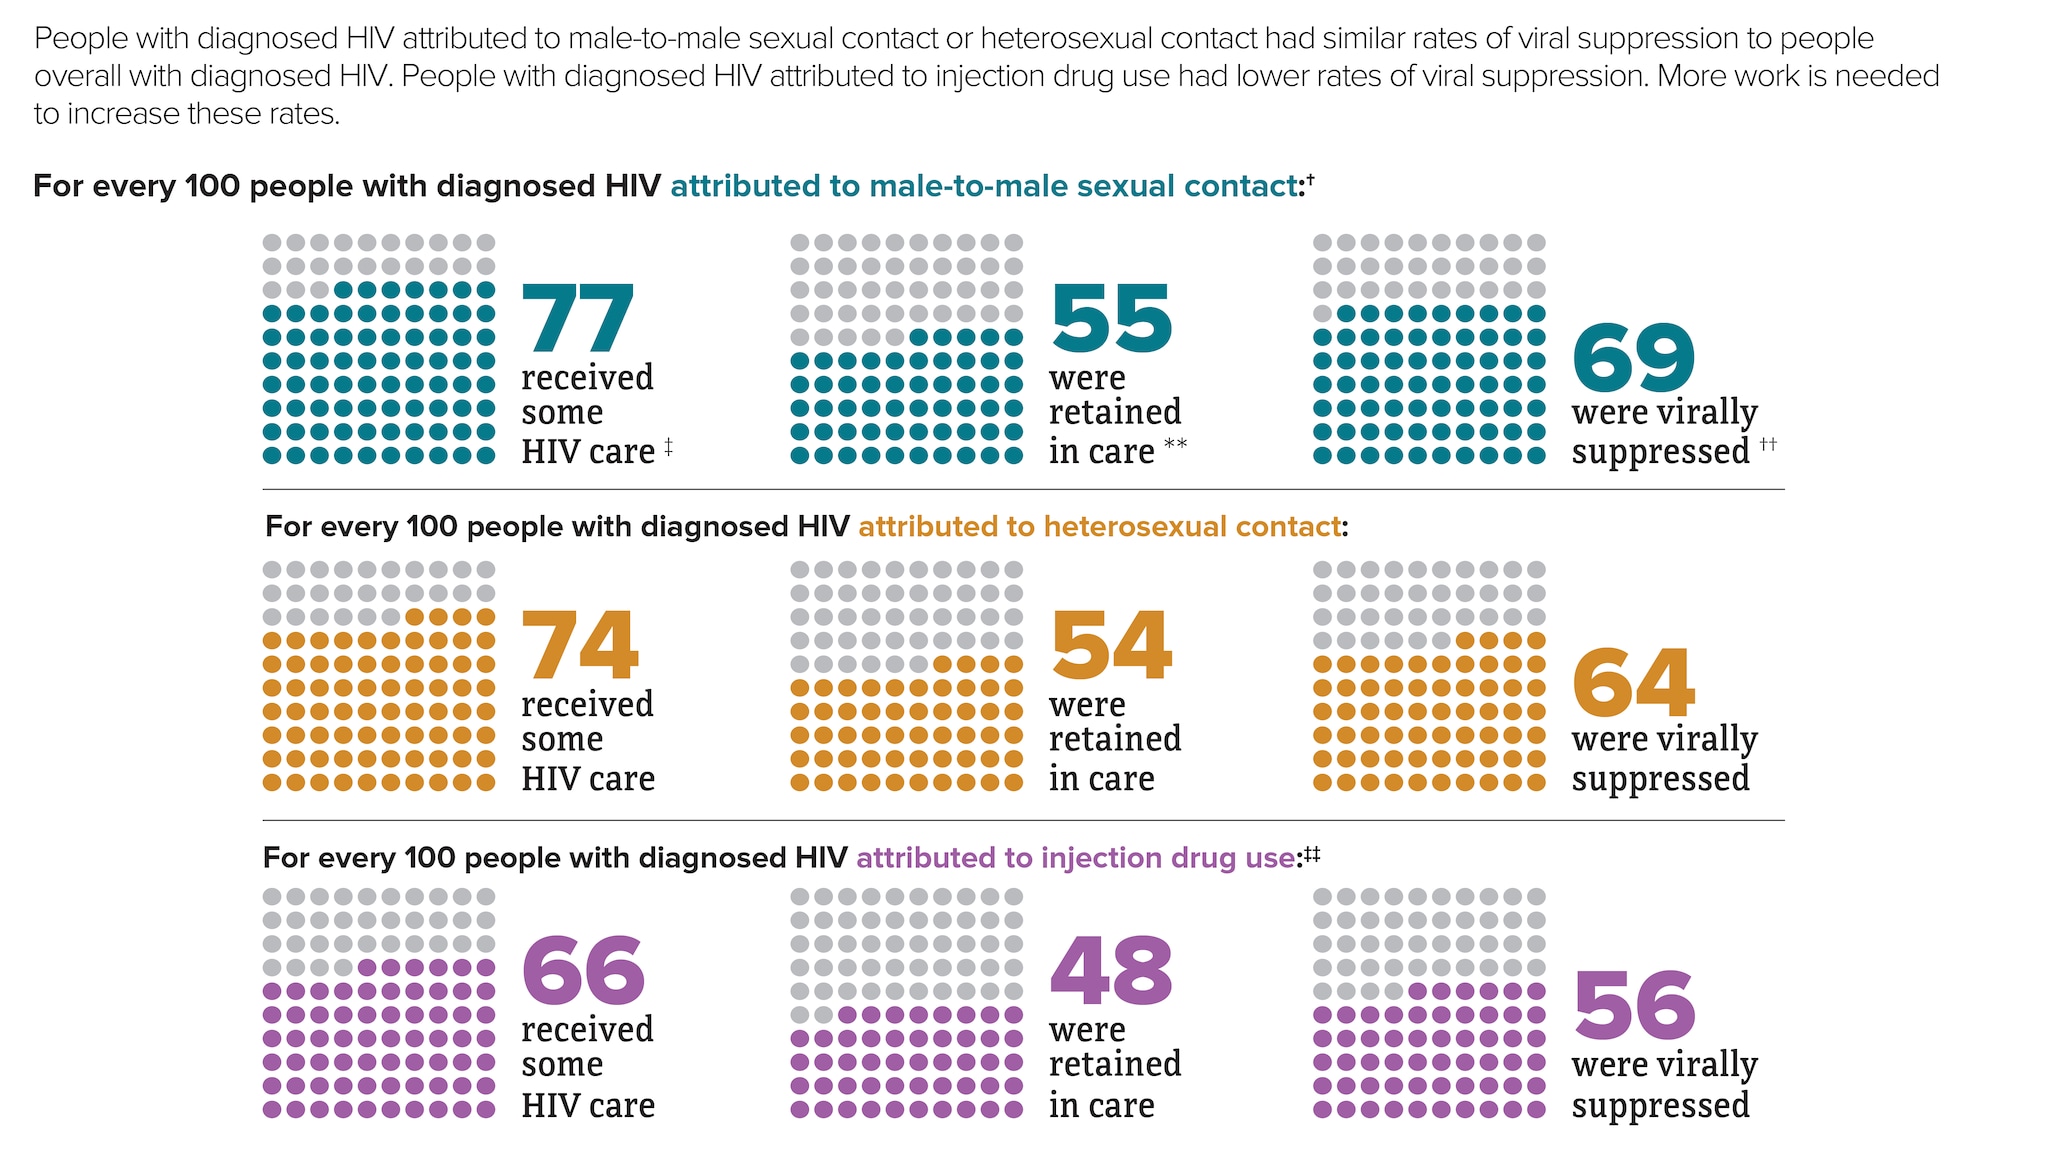 People with diagnosed HIV attributed to male-to-male sexual contact or heterosexual contact had similar rates of viral suppression to people overall with diagnosed HIV. People with diagnosed HIV attributed injection drug use had lower rates of viral suppression. More work is needed to increase these rates. For every 100 people with diagnosed HIV attributed to male-to-male sexual contact, 77 received some HIV care, 55 were retained in care, and 69 were virally suppressed. For every 100 people with diagnosed HIV attributed to heterosexual contact, 74 received some HIV care, 54 were retained in care, and 64 were virally suppressed. For every 100 people with diagnosed HIV attributed to injection drug use, 66 received some HIV care, 48 were retained in care, and 56 were virally suppressed.